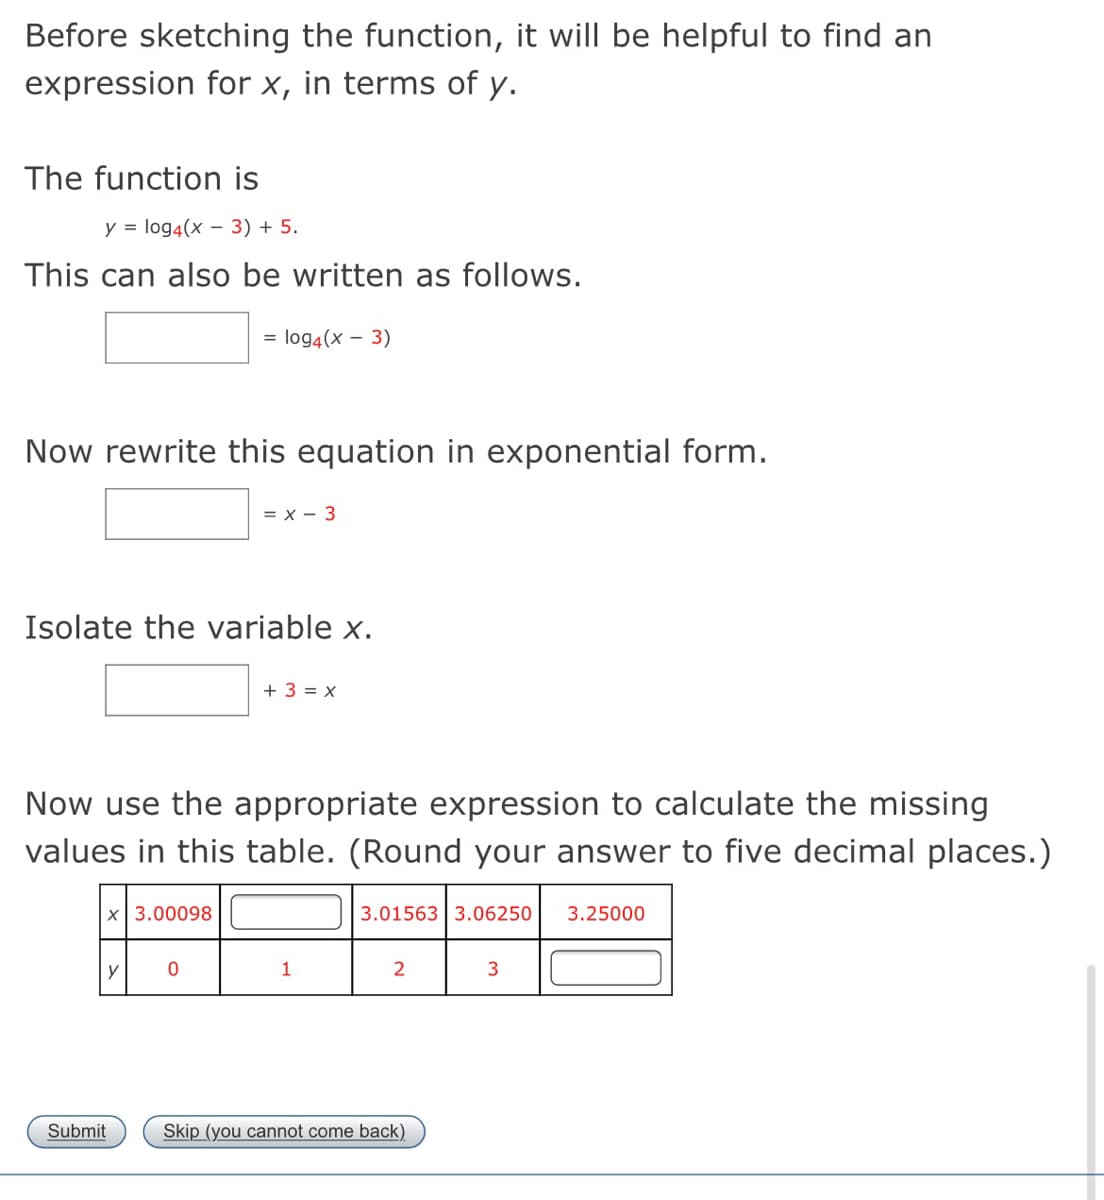 Before sketching the function, it will be helpful to find an
expression for x, in terms of y.
The function is
y = log4(x – 3) + 5.
This can also be written as follows.
= log4(x – 3)
Now rewrite this equation in exponential form.
= x - 3
Isolate the variable x.
+ 3 = x
Now use the appropriate expression to calculate the missing
values in this table. (Round your answer to five decimal places.)
x 3.00098
3.01563 3.06250
3.25000
y
1
2
Submit
Skip (you cannot come back).
